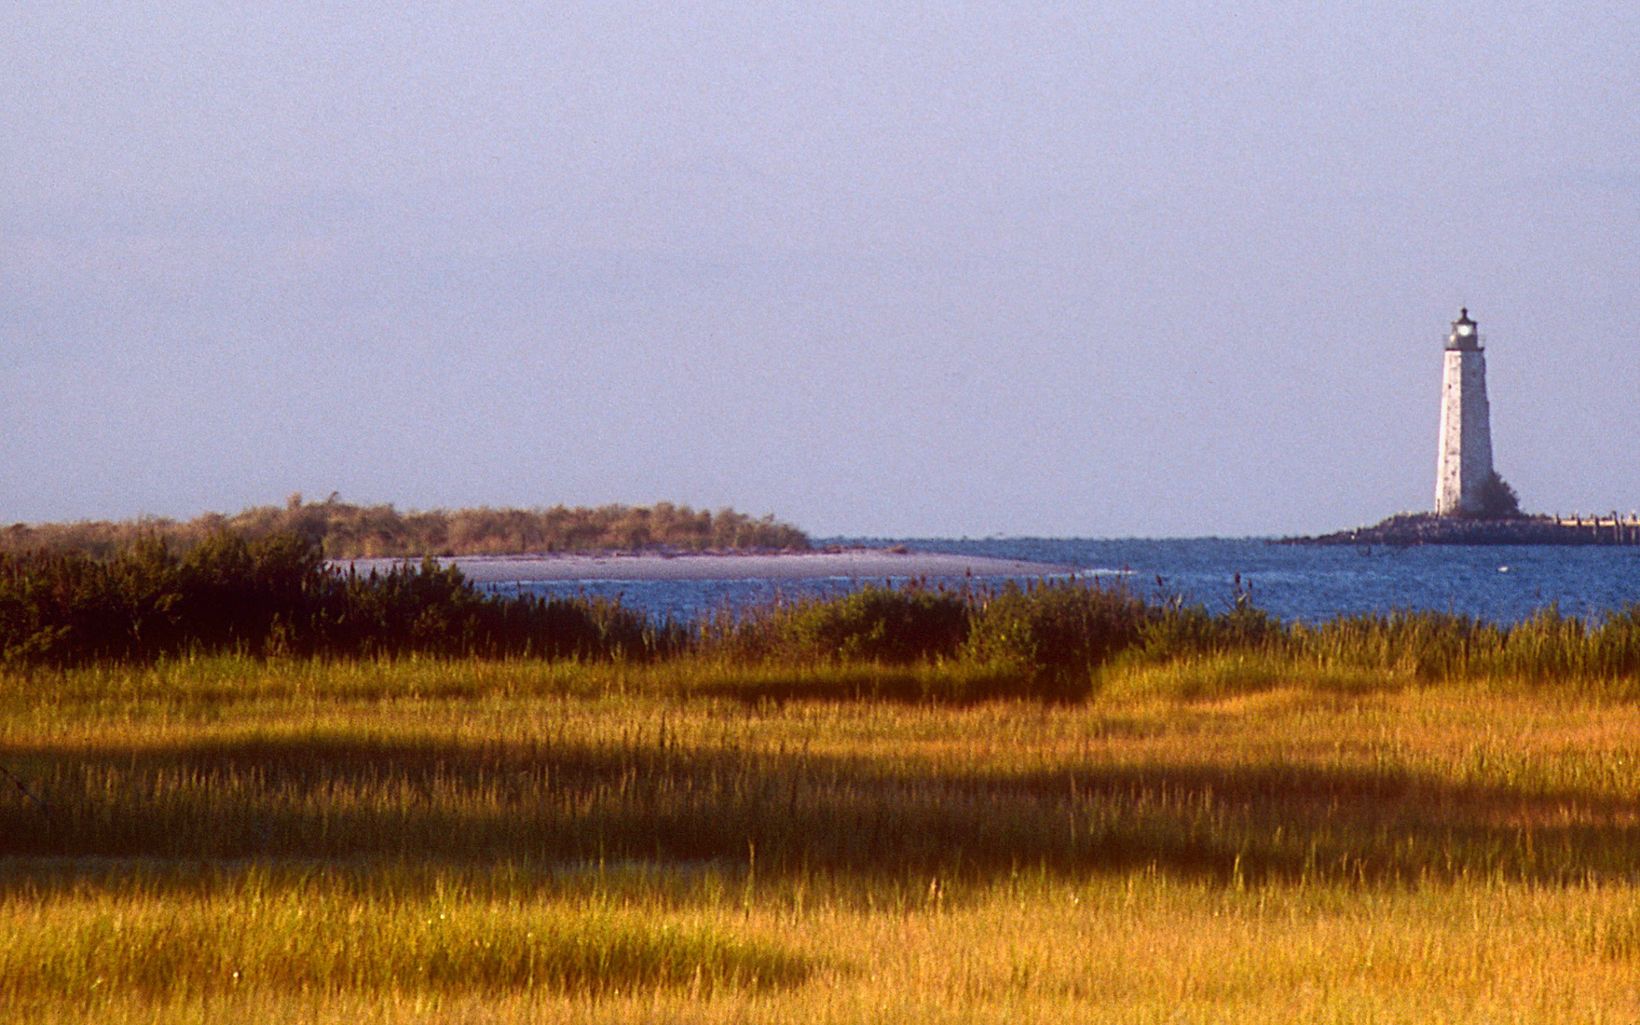 The New Point Comfort lighthouse rises from a spit of land jutting into the Chesapeake Bay. An open area of short, yellow winter grass is in the foreground.